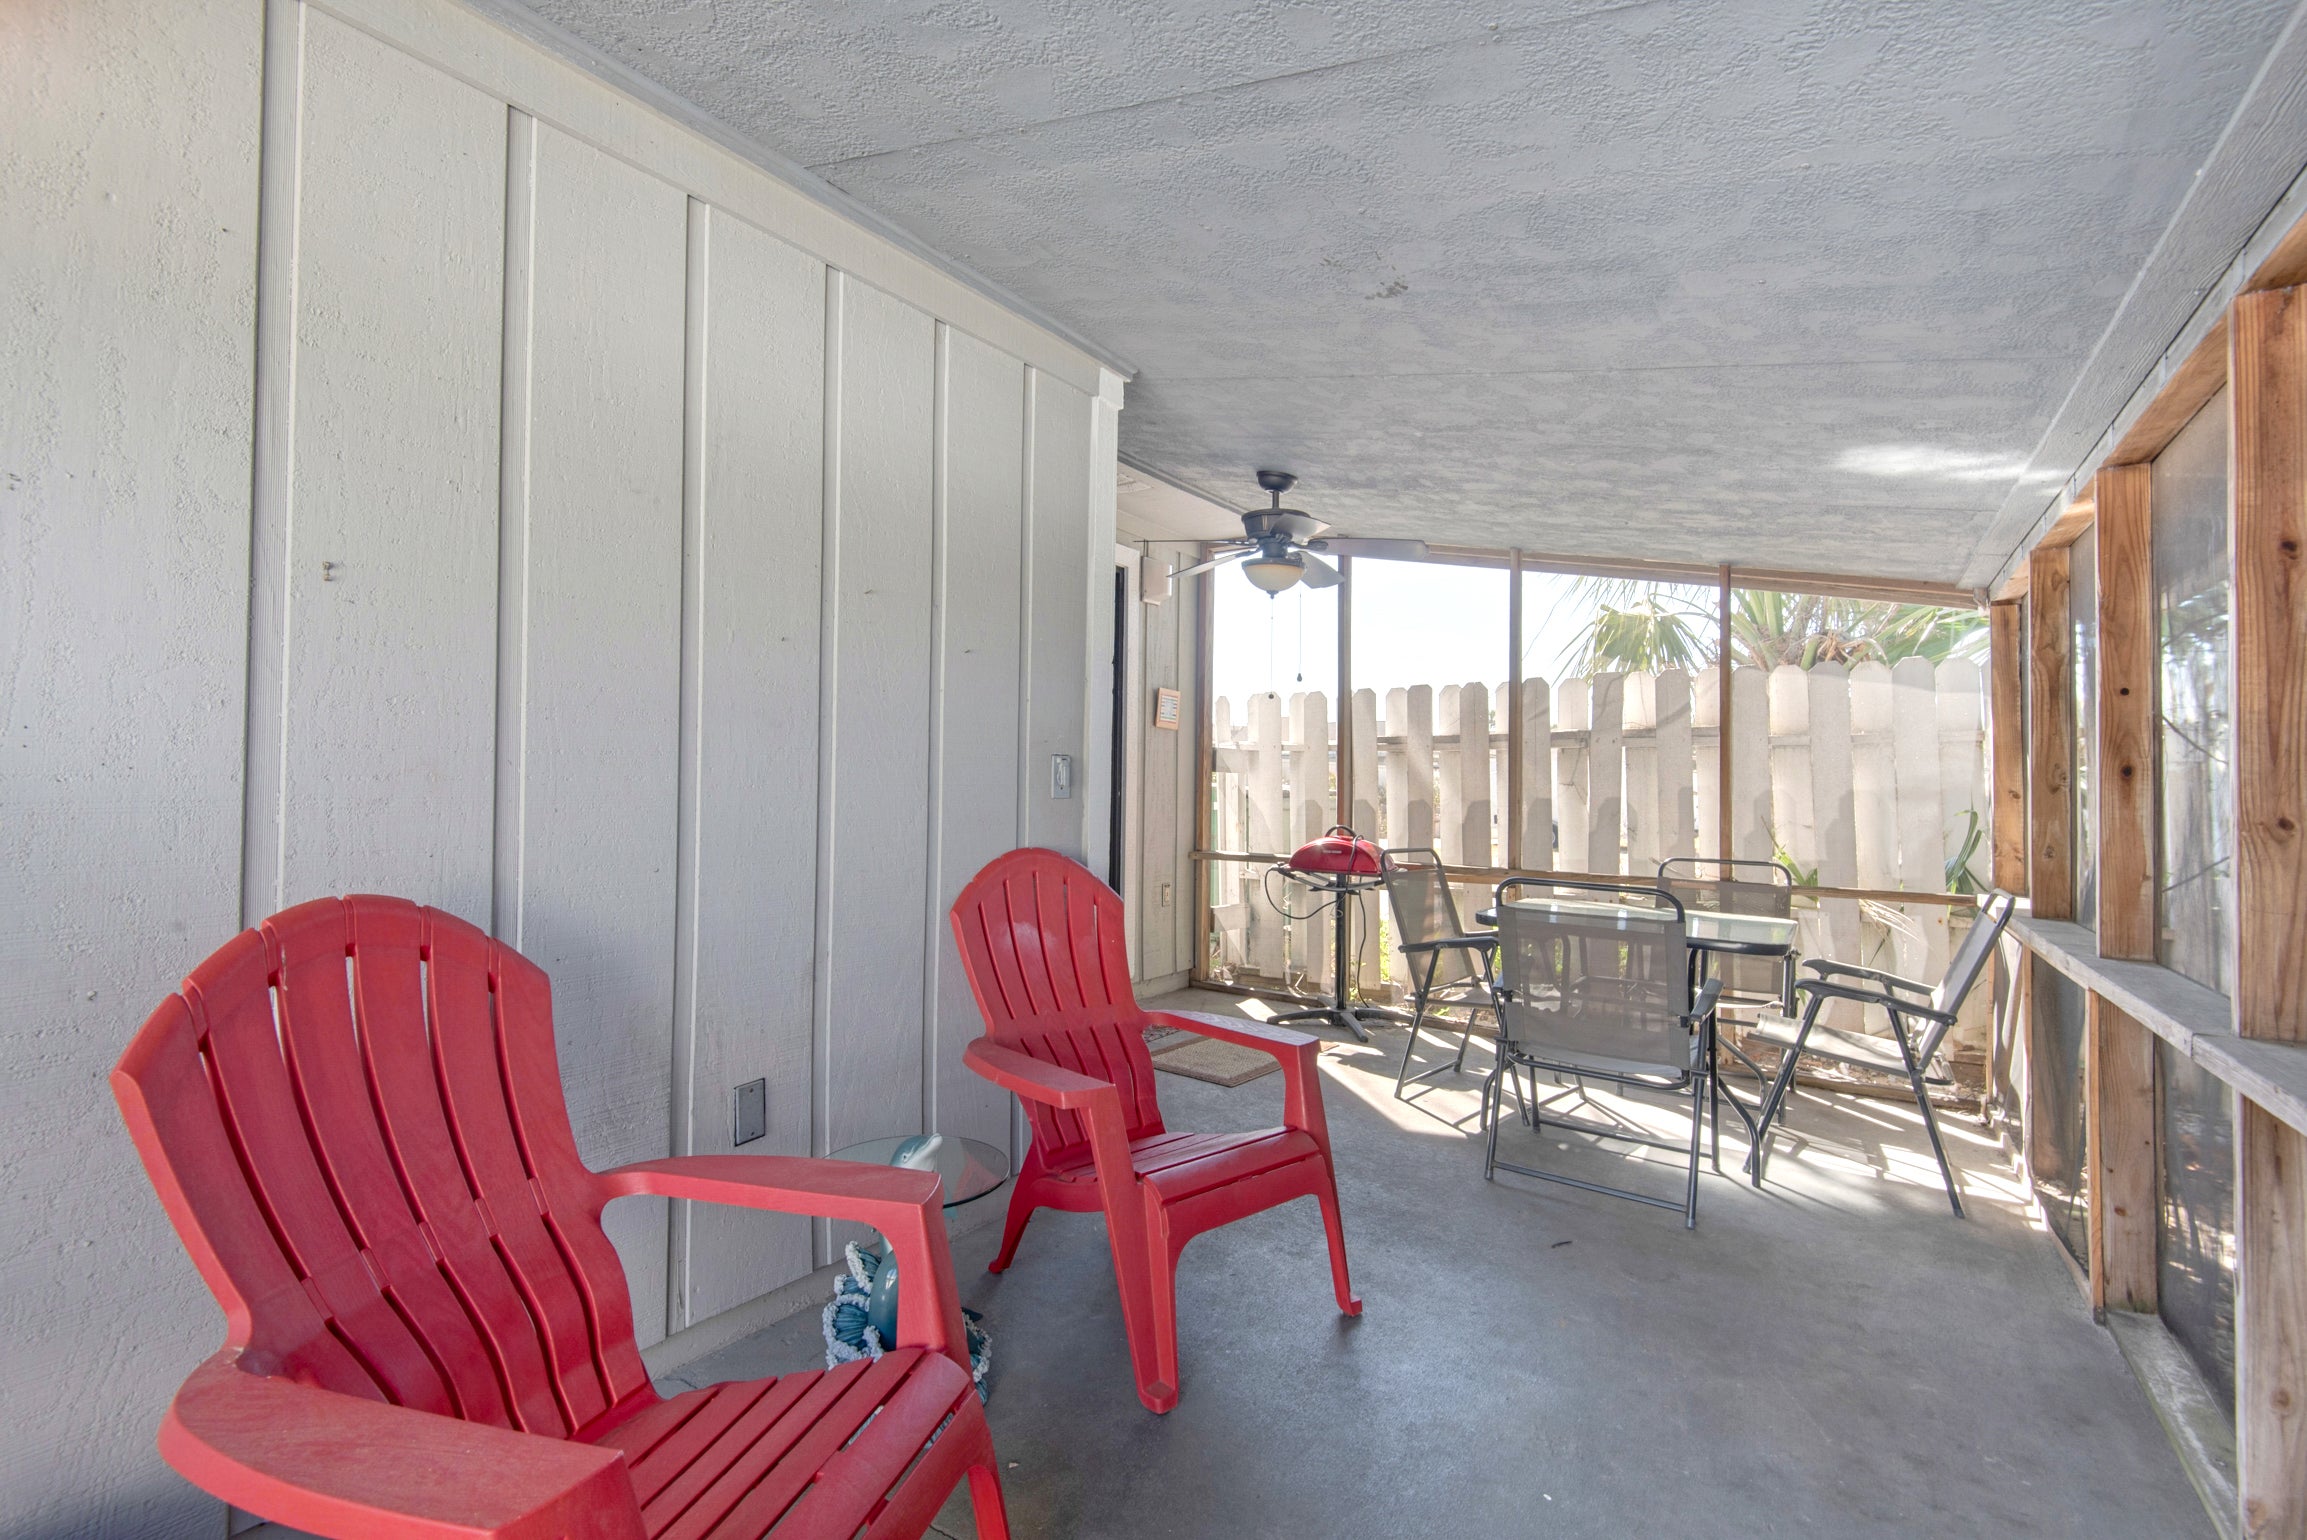 Covered and Screened Patio